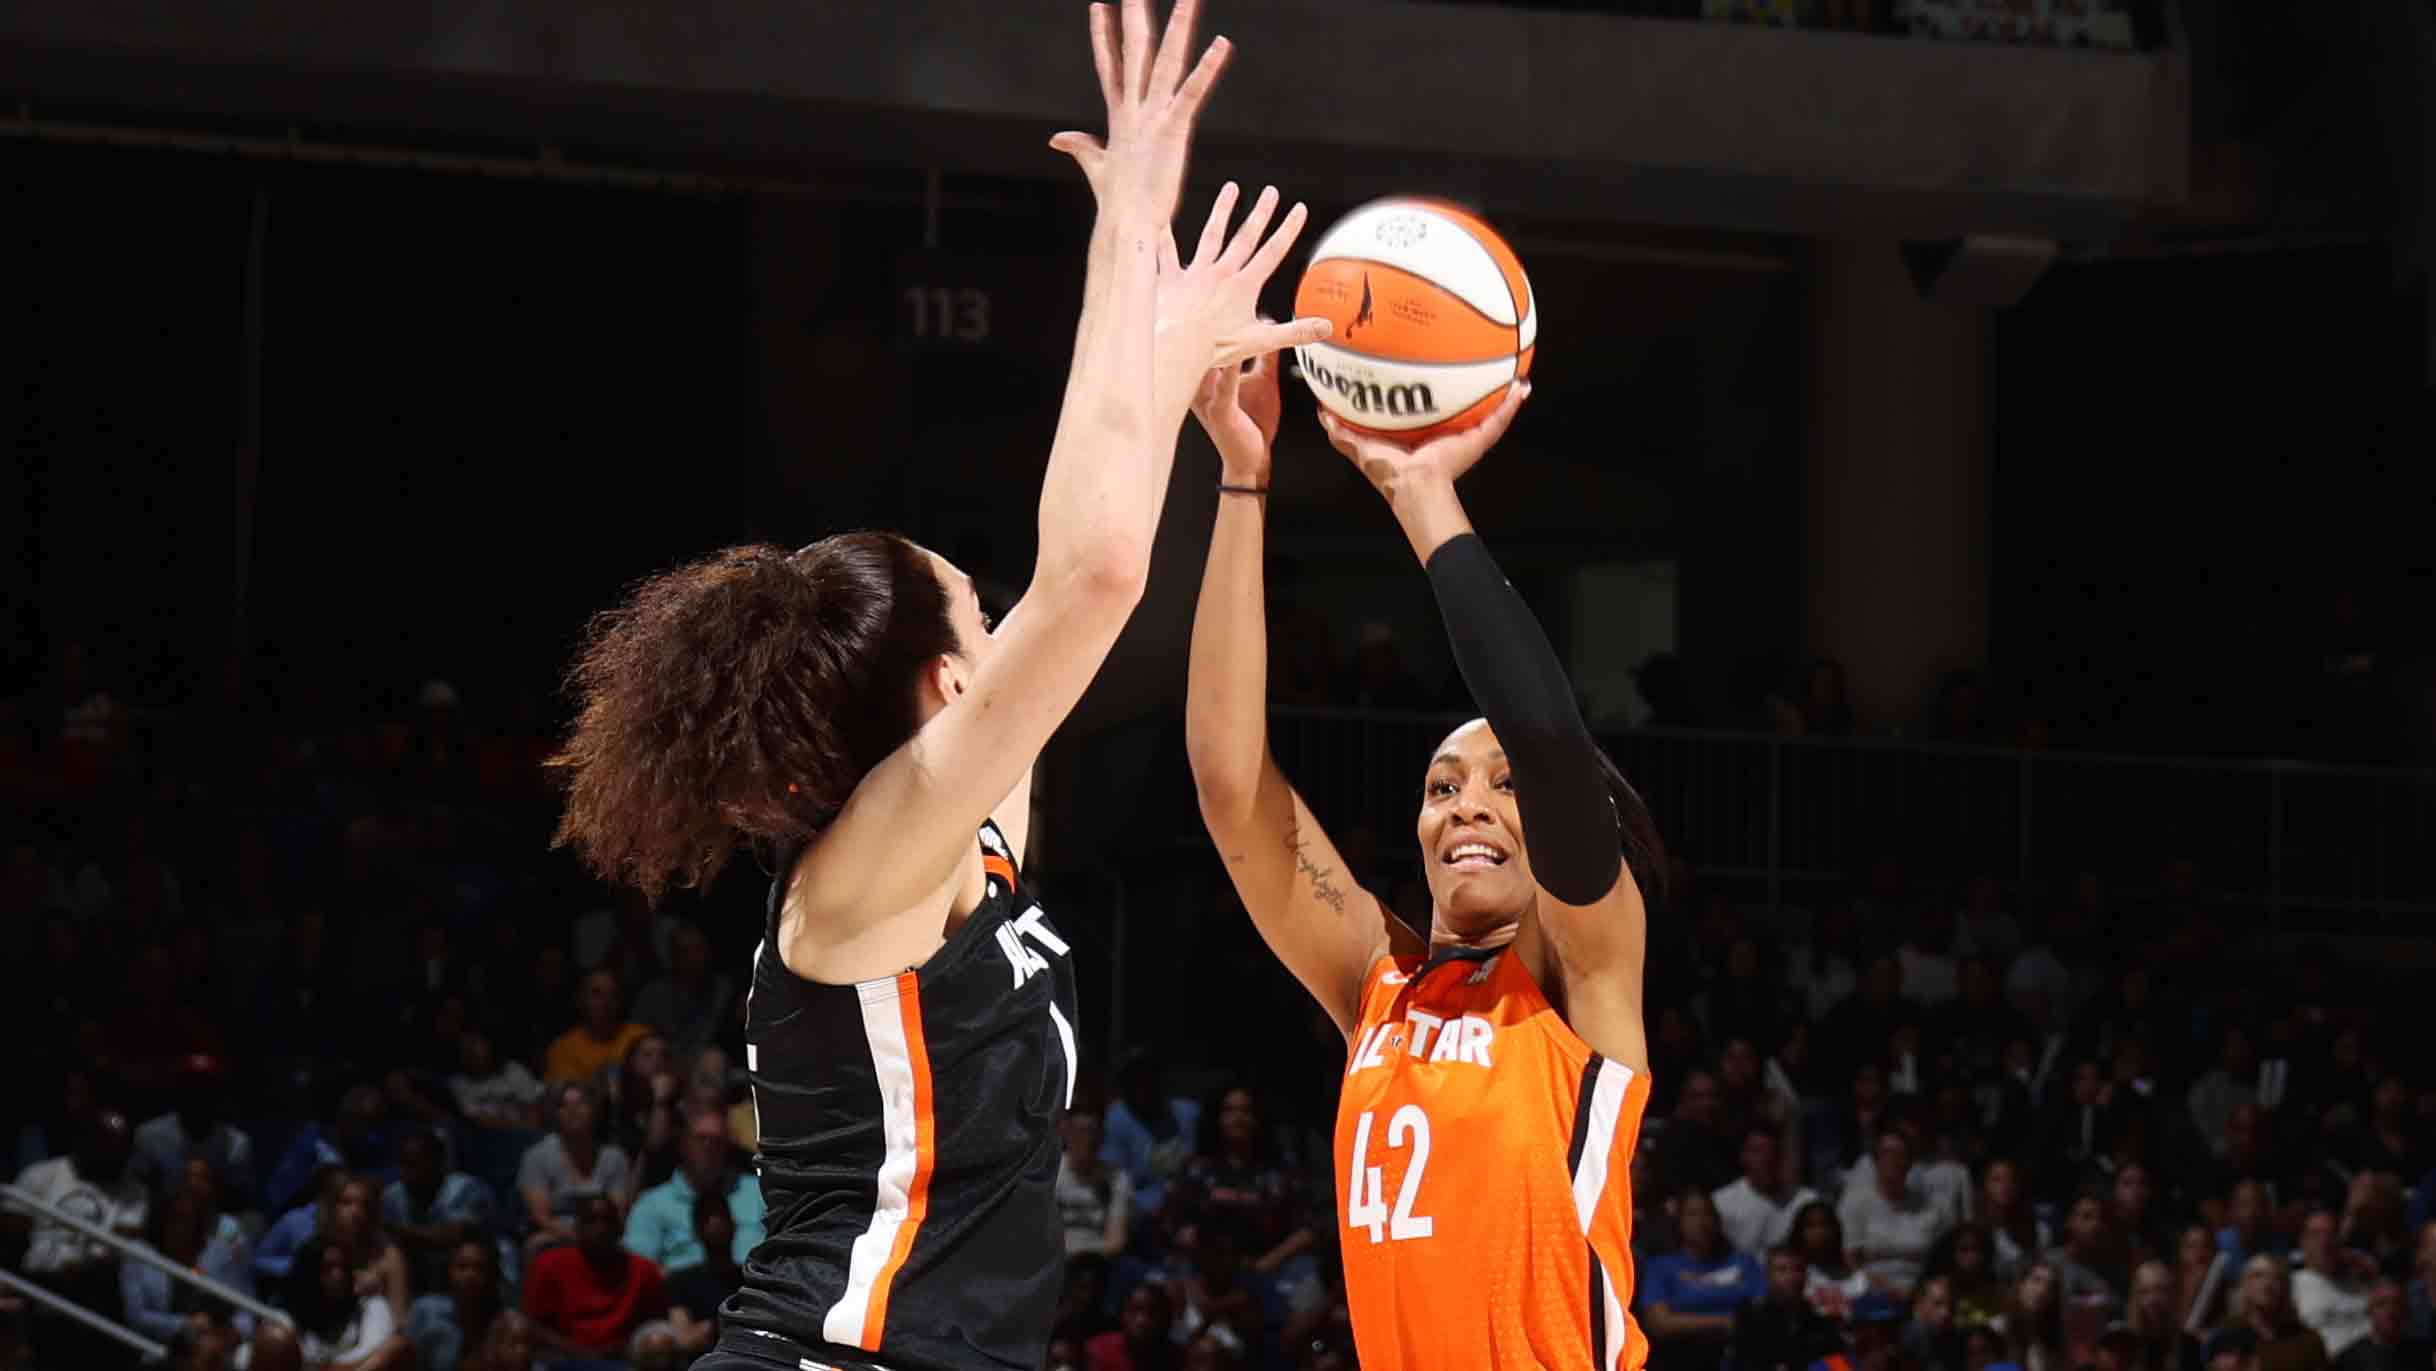 2023 WNBA All-Star Game, 3-point shooting and skills contest photos